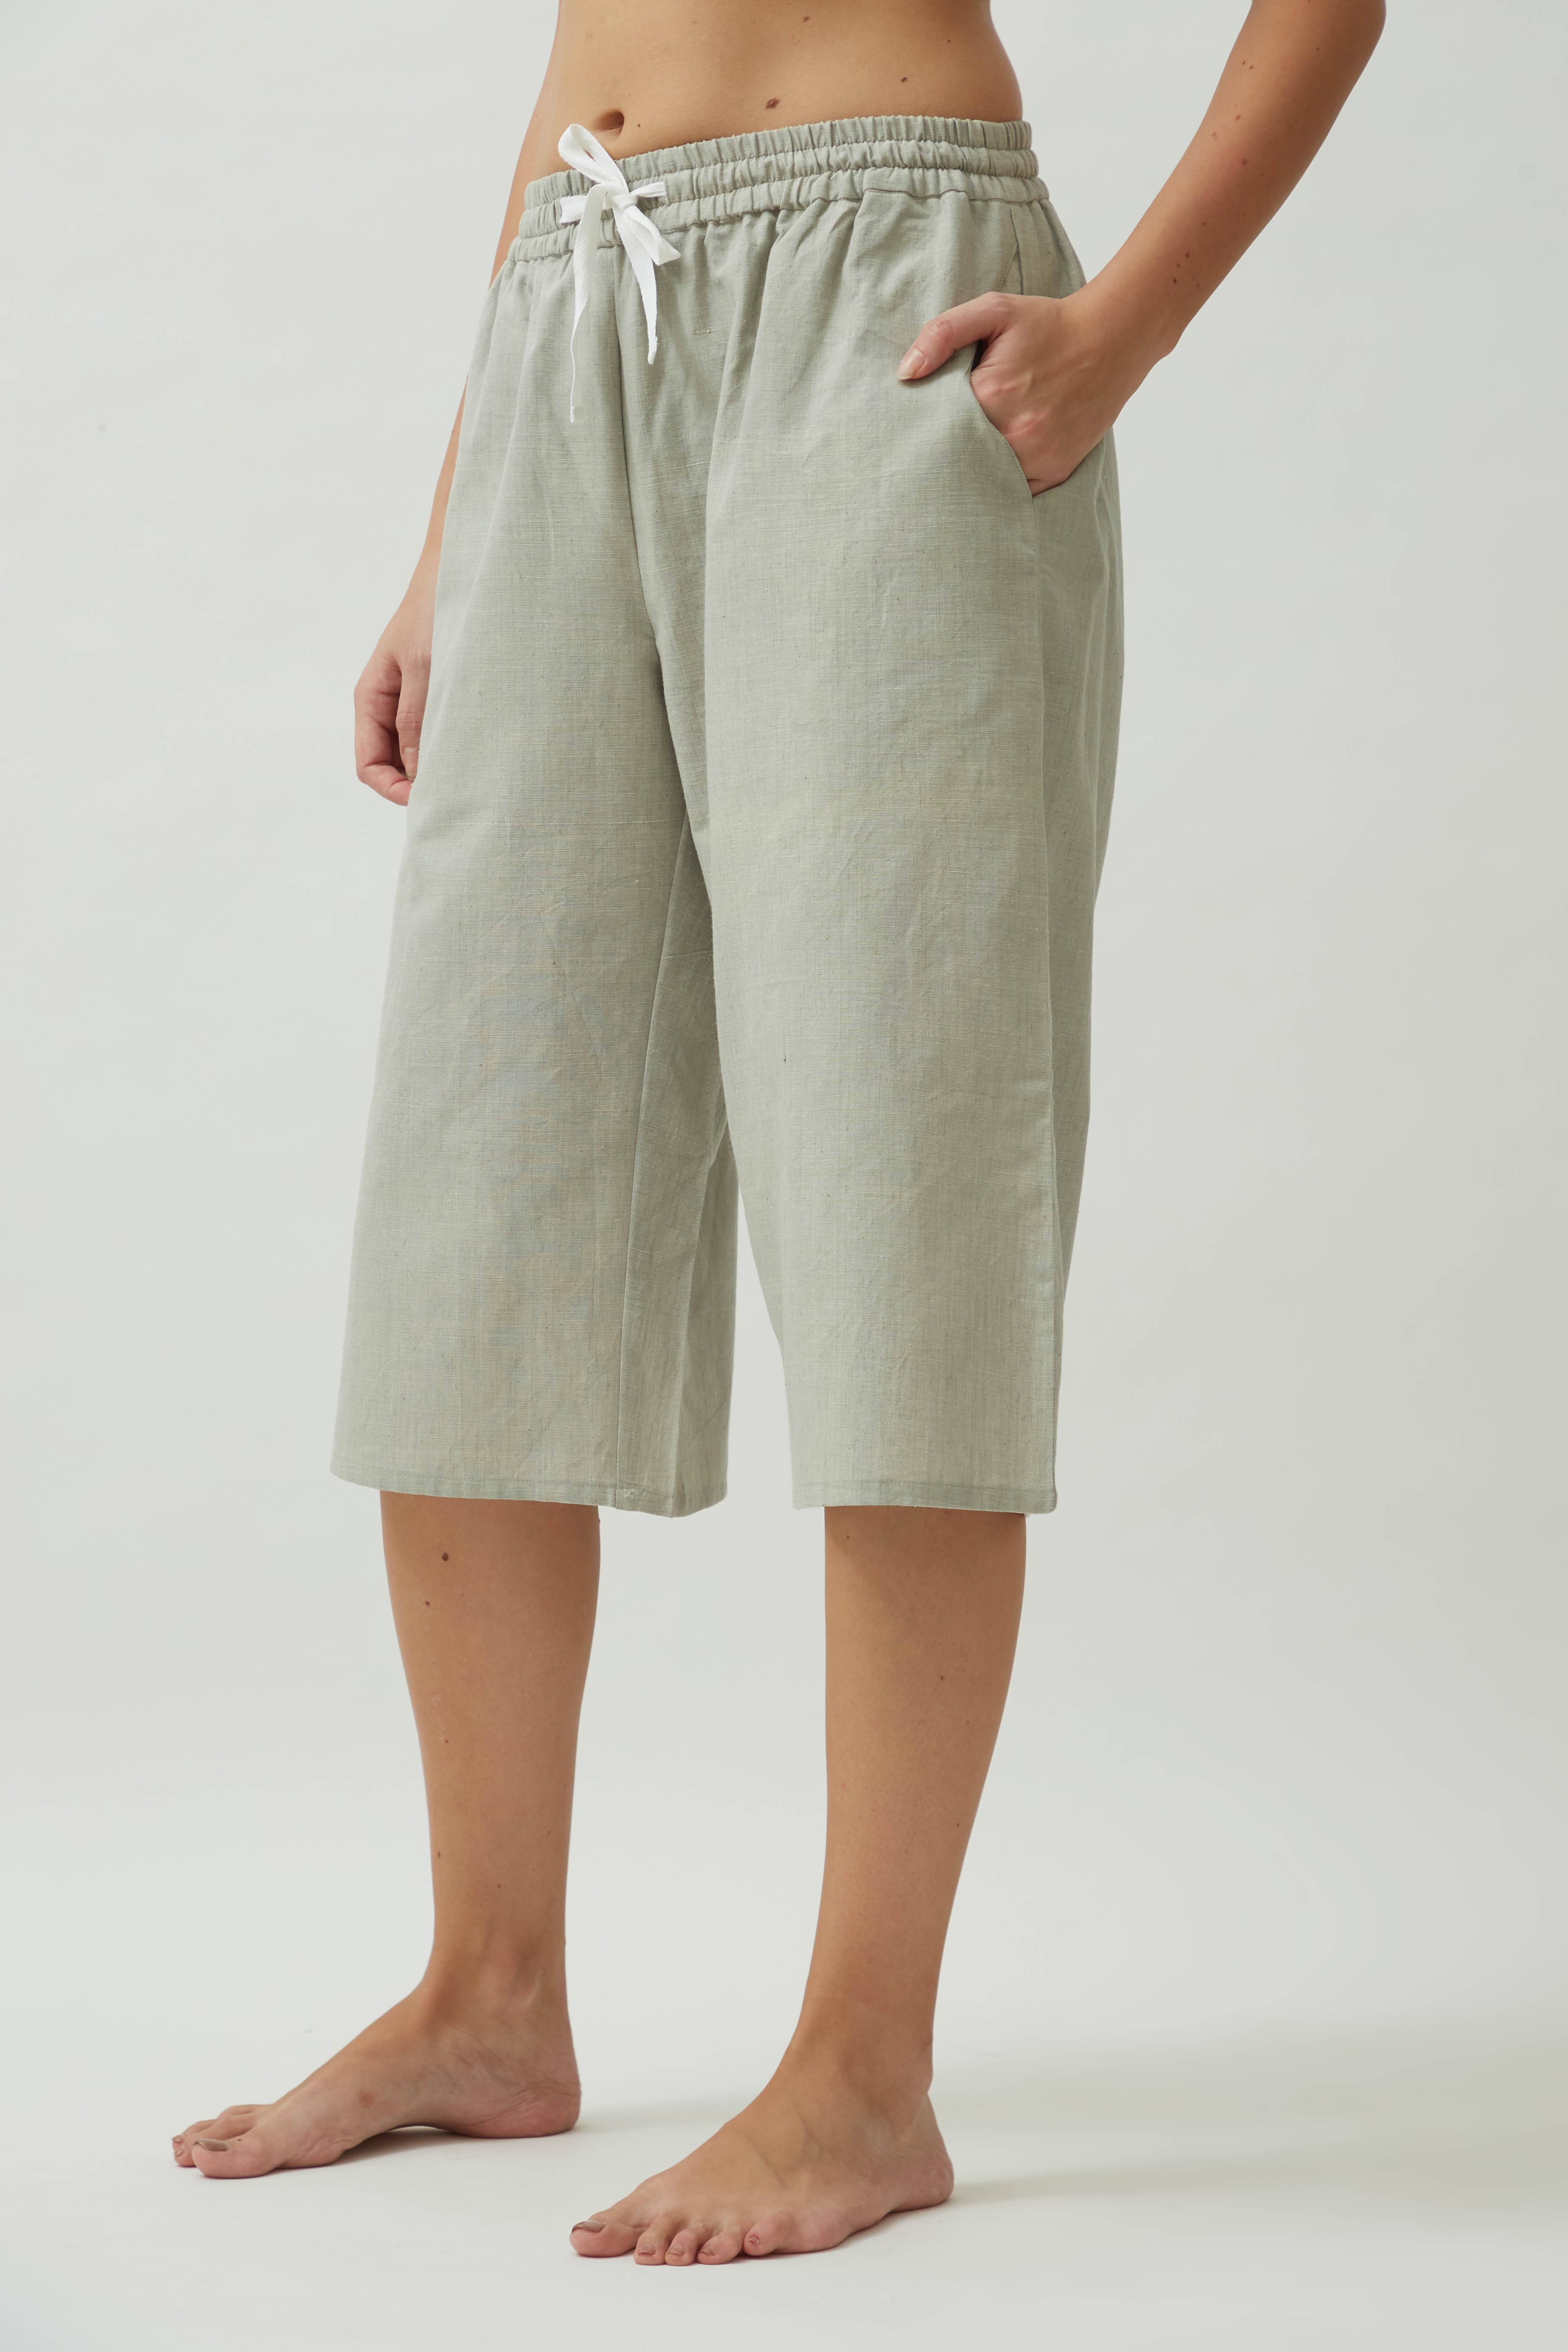 Saltpetre womens casual knee length culotte shorts with side pockets, in cloud grey in 100% organic cotton fabric.